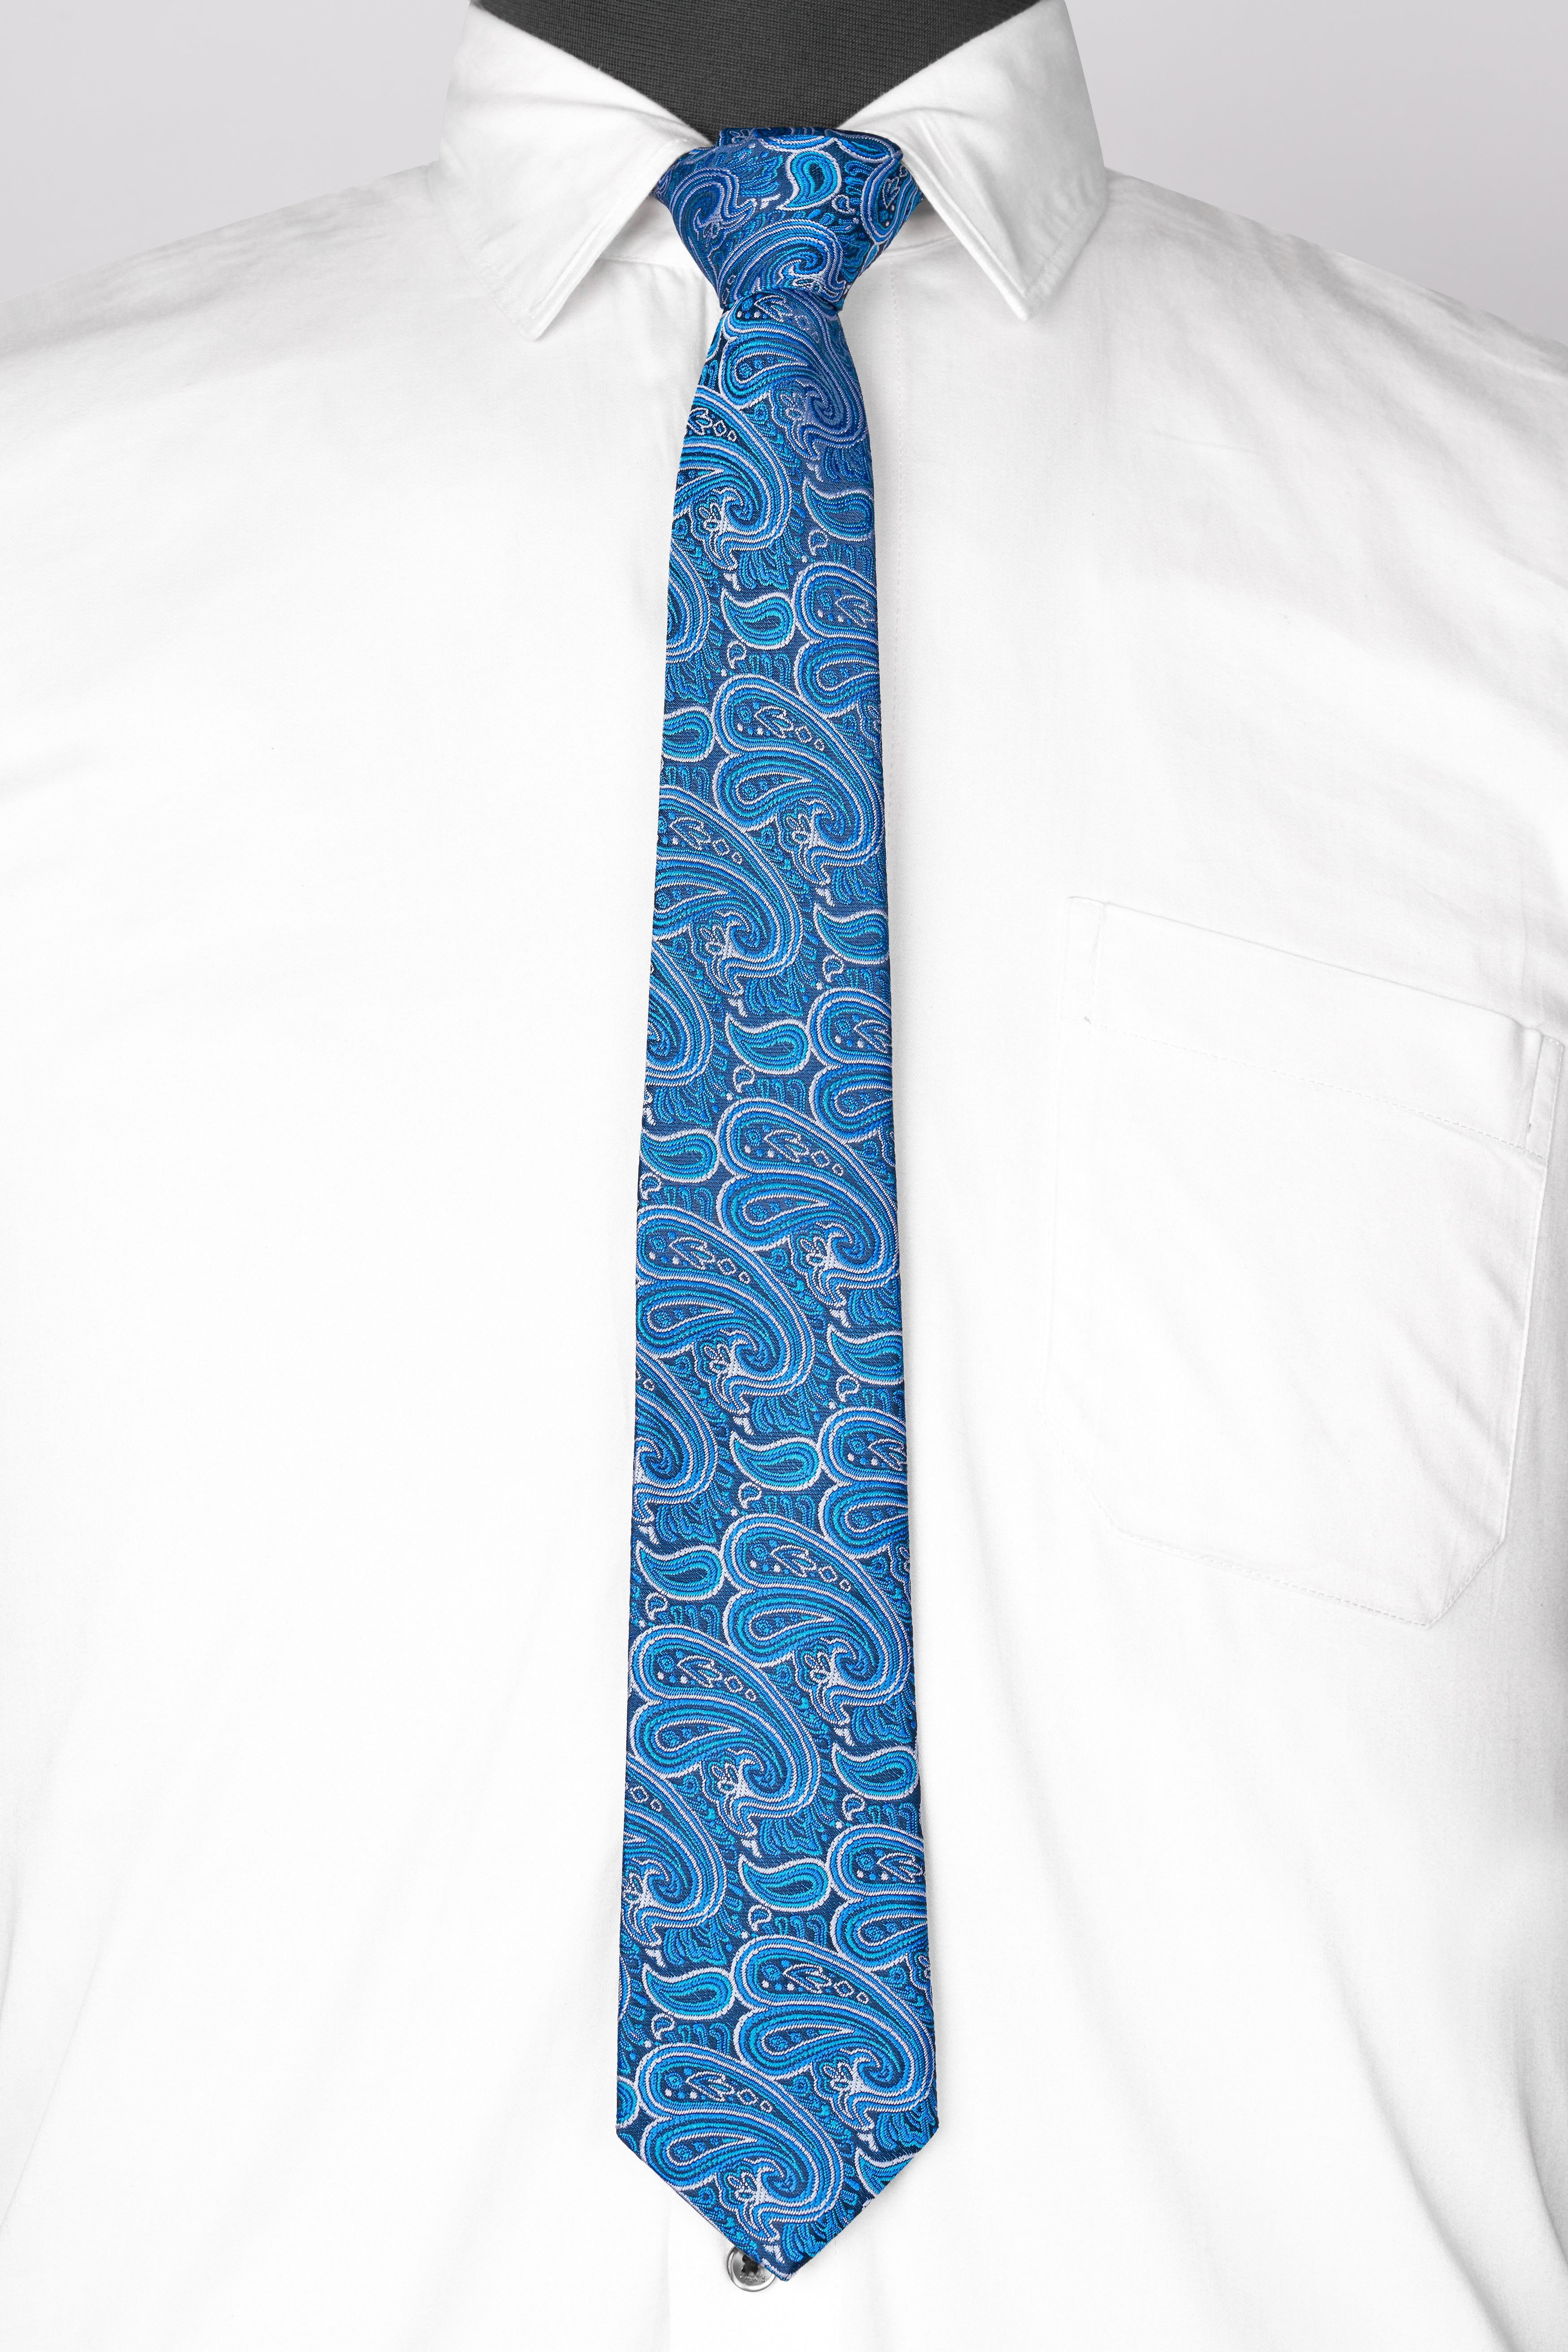 Medium Persian Blue and White Paisley Jacquard Tie with Pocket Square  TP050